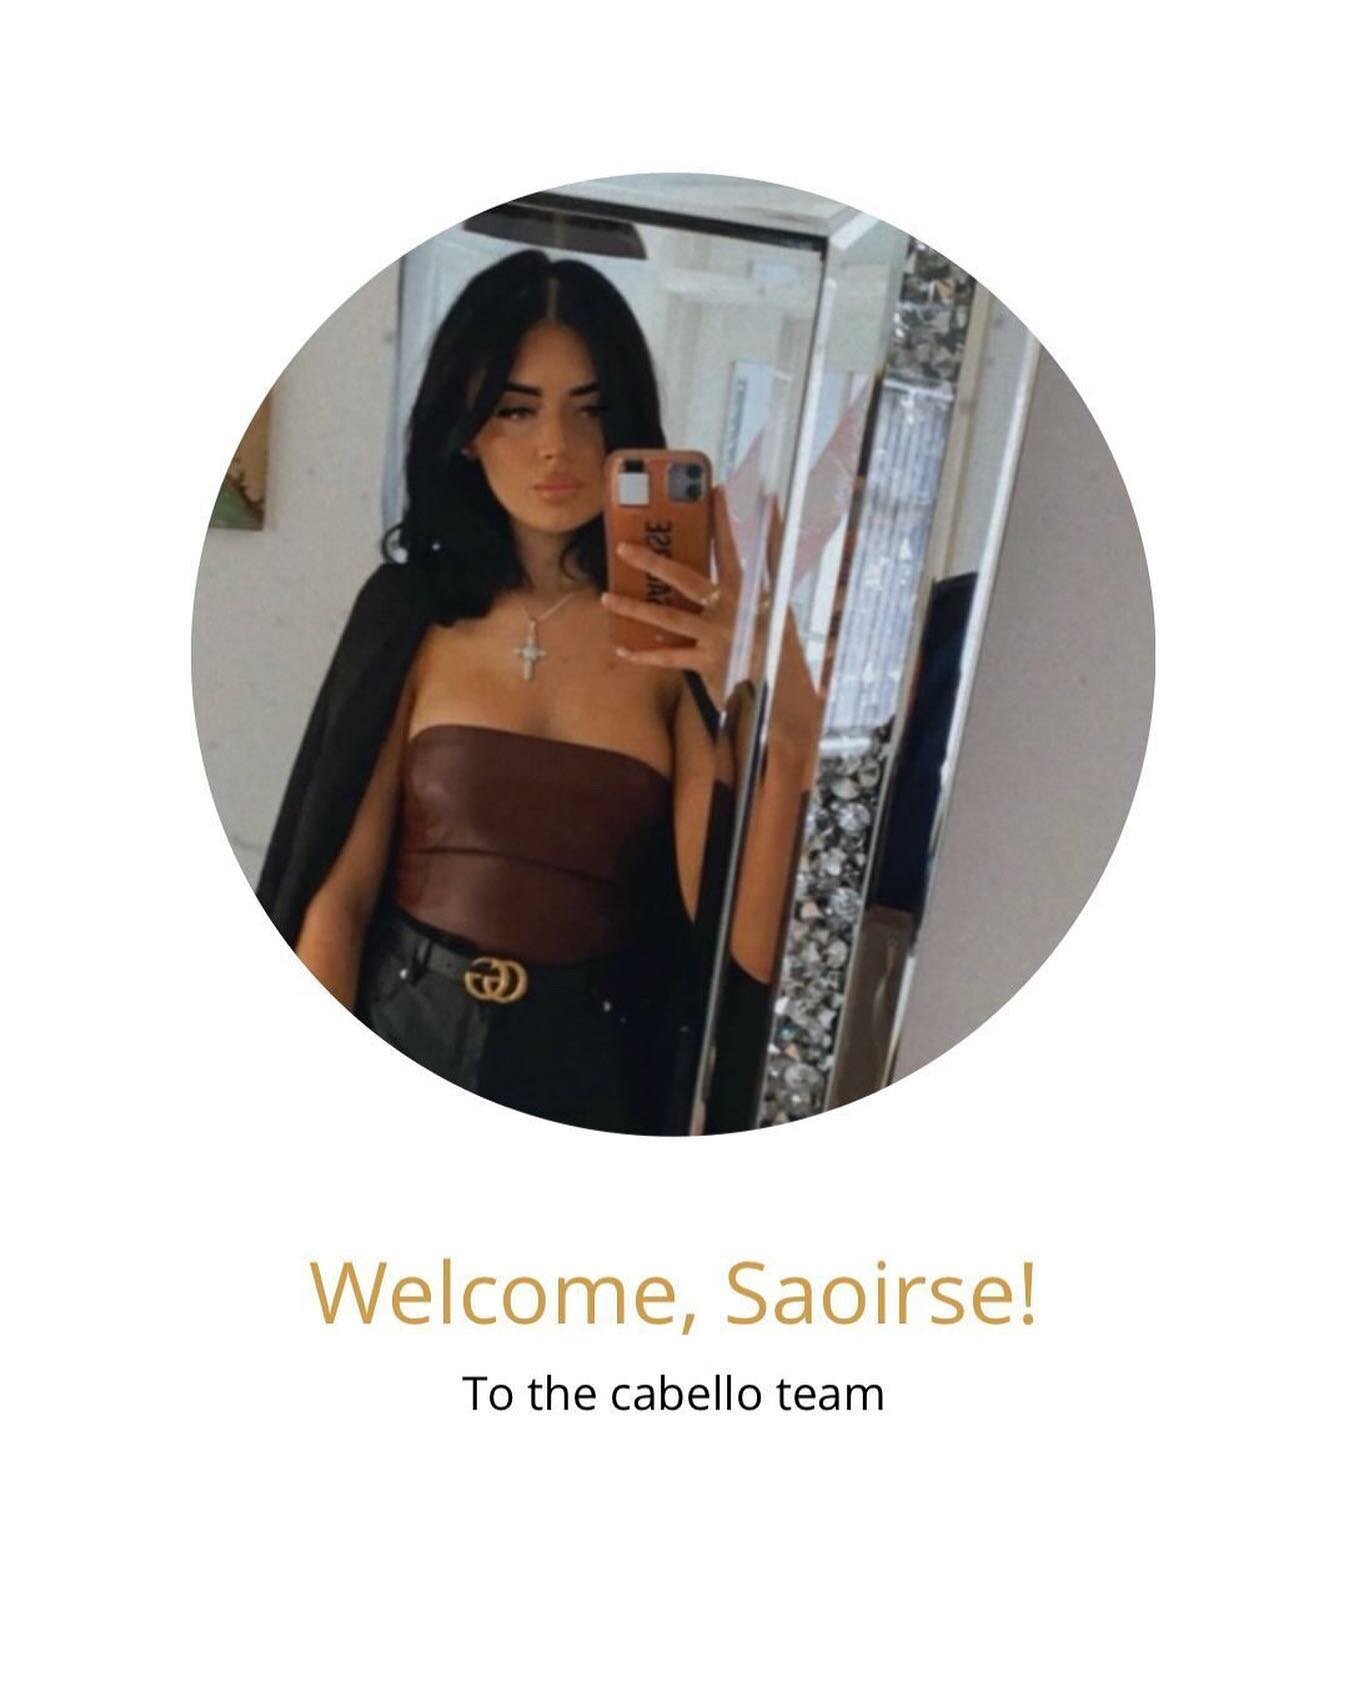 So excited to have a new gal in the gang👏🏻

Introducing the super talented Saoirse. Check out her work at @enzohair.saoirse and help her feel very welcome☺️✨

And we&rsquo;re helping Saoirse to feel at home with a special introductory:
✨20% off all